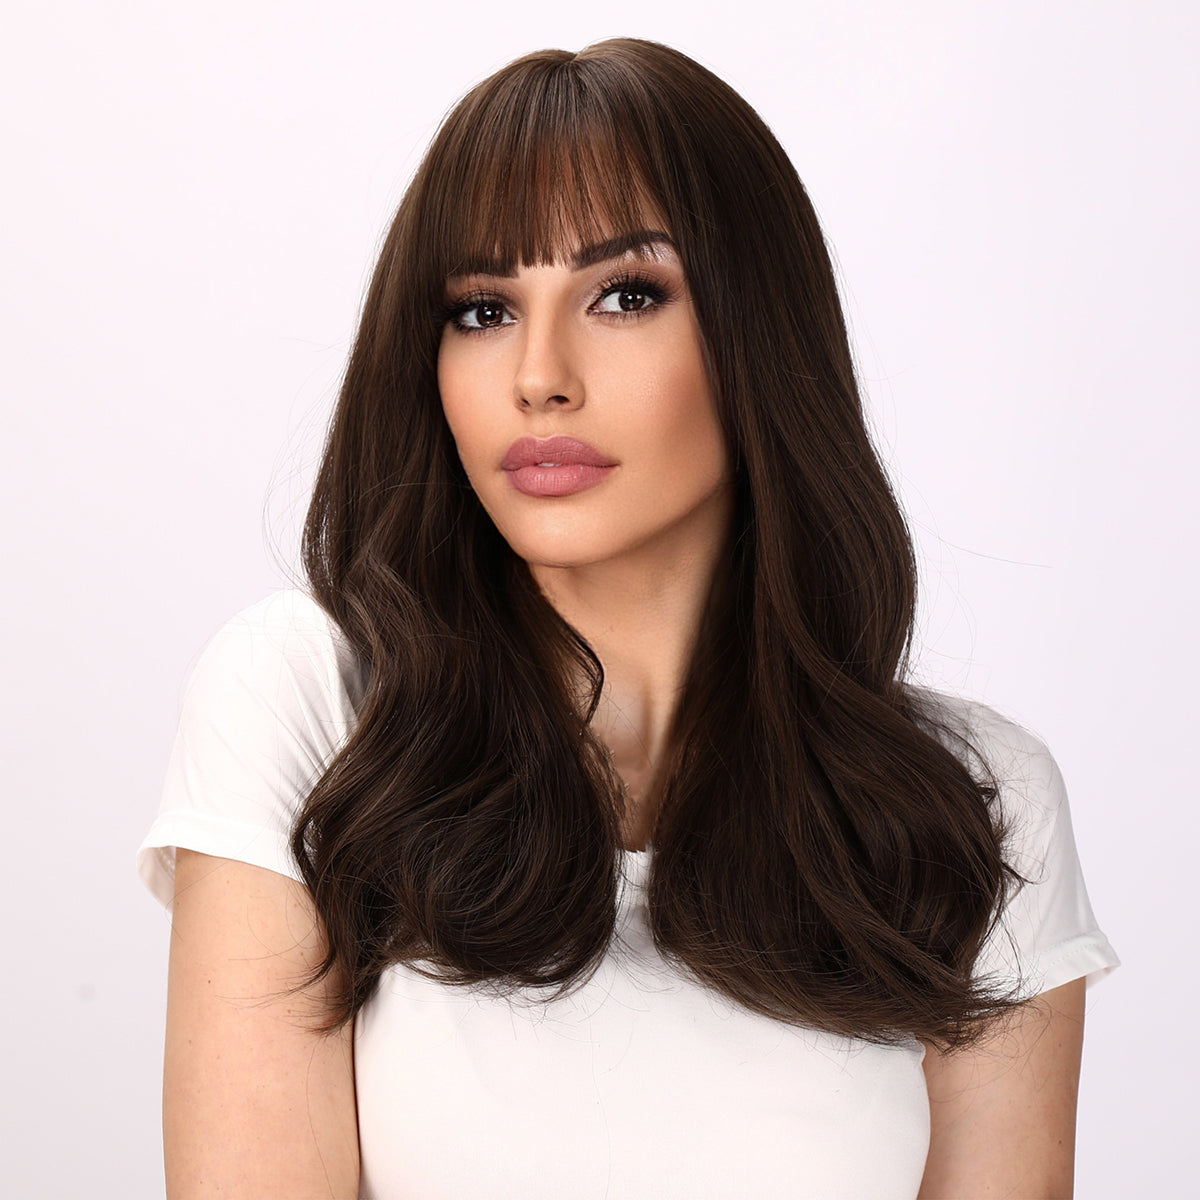 [Emily in Paris] 20-inch Brown Loose Wave with Bangs (Synthetic Wig)